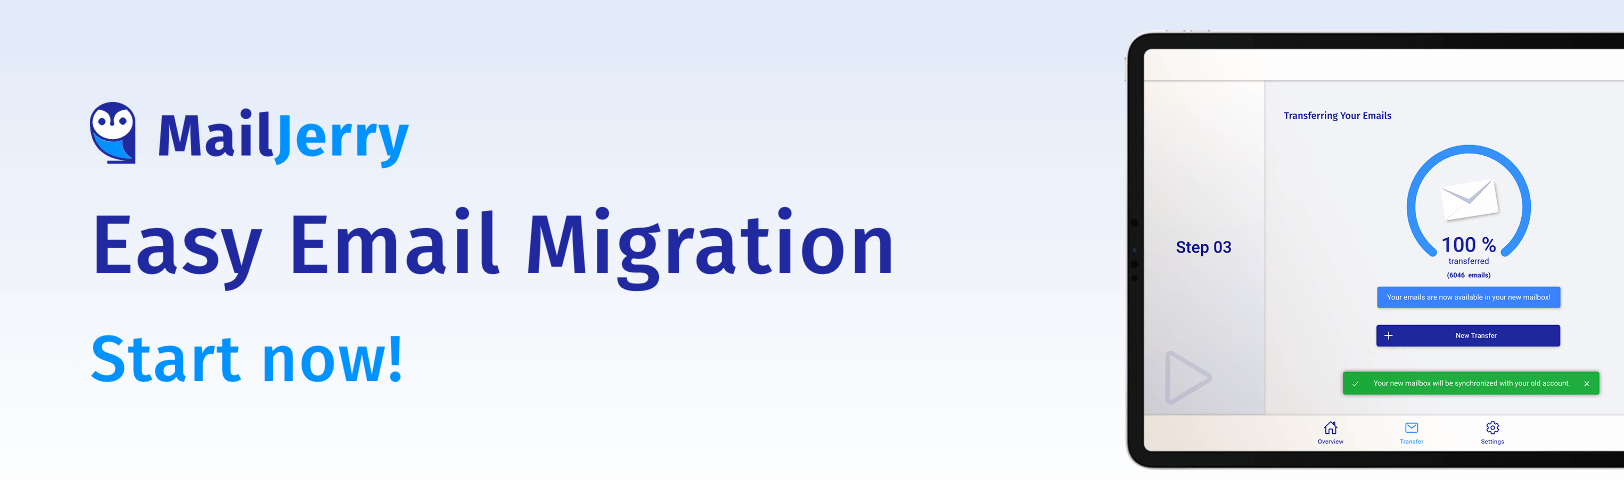 Start free email migration with the email migration tool